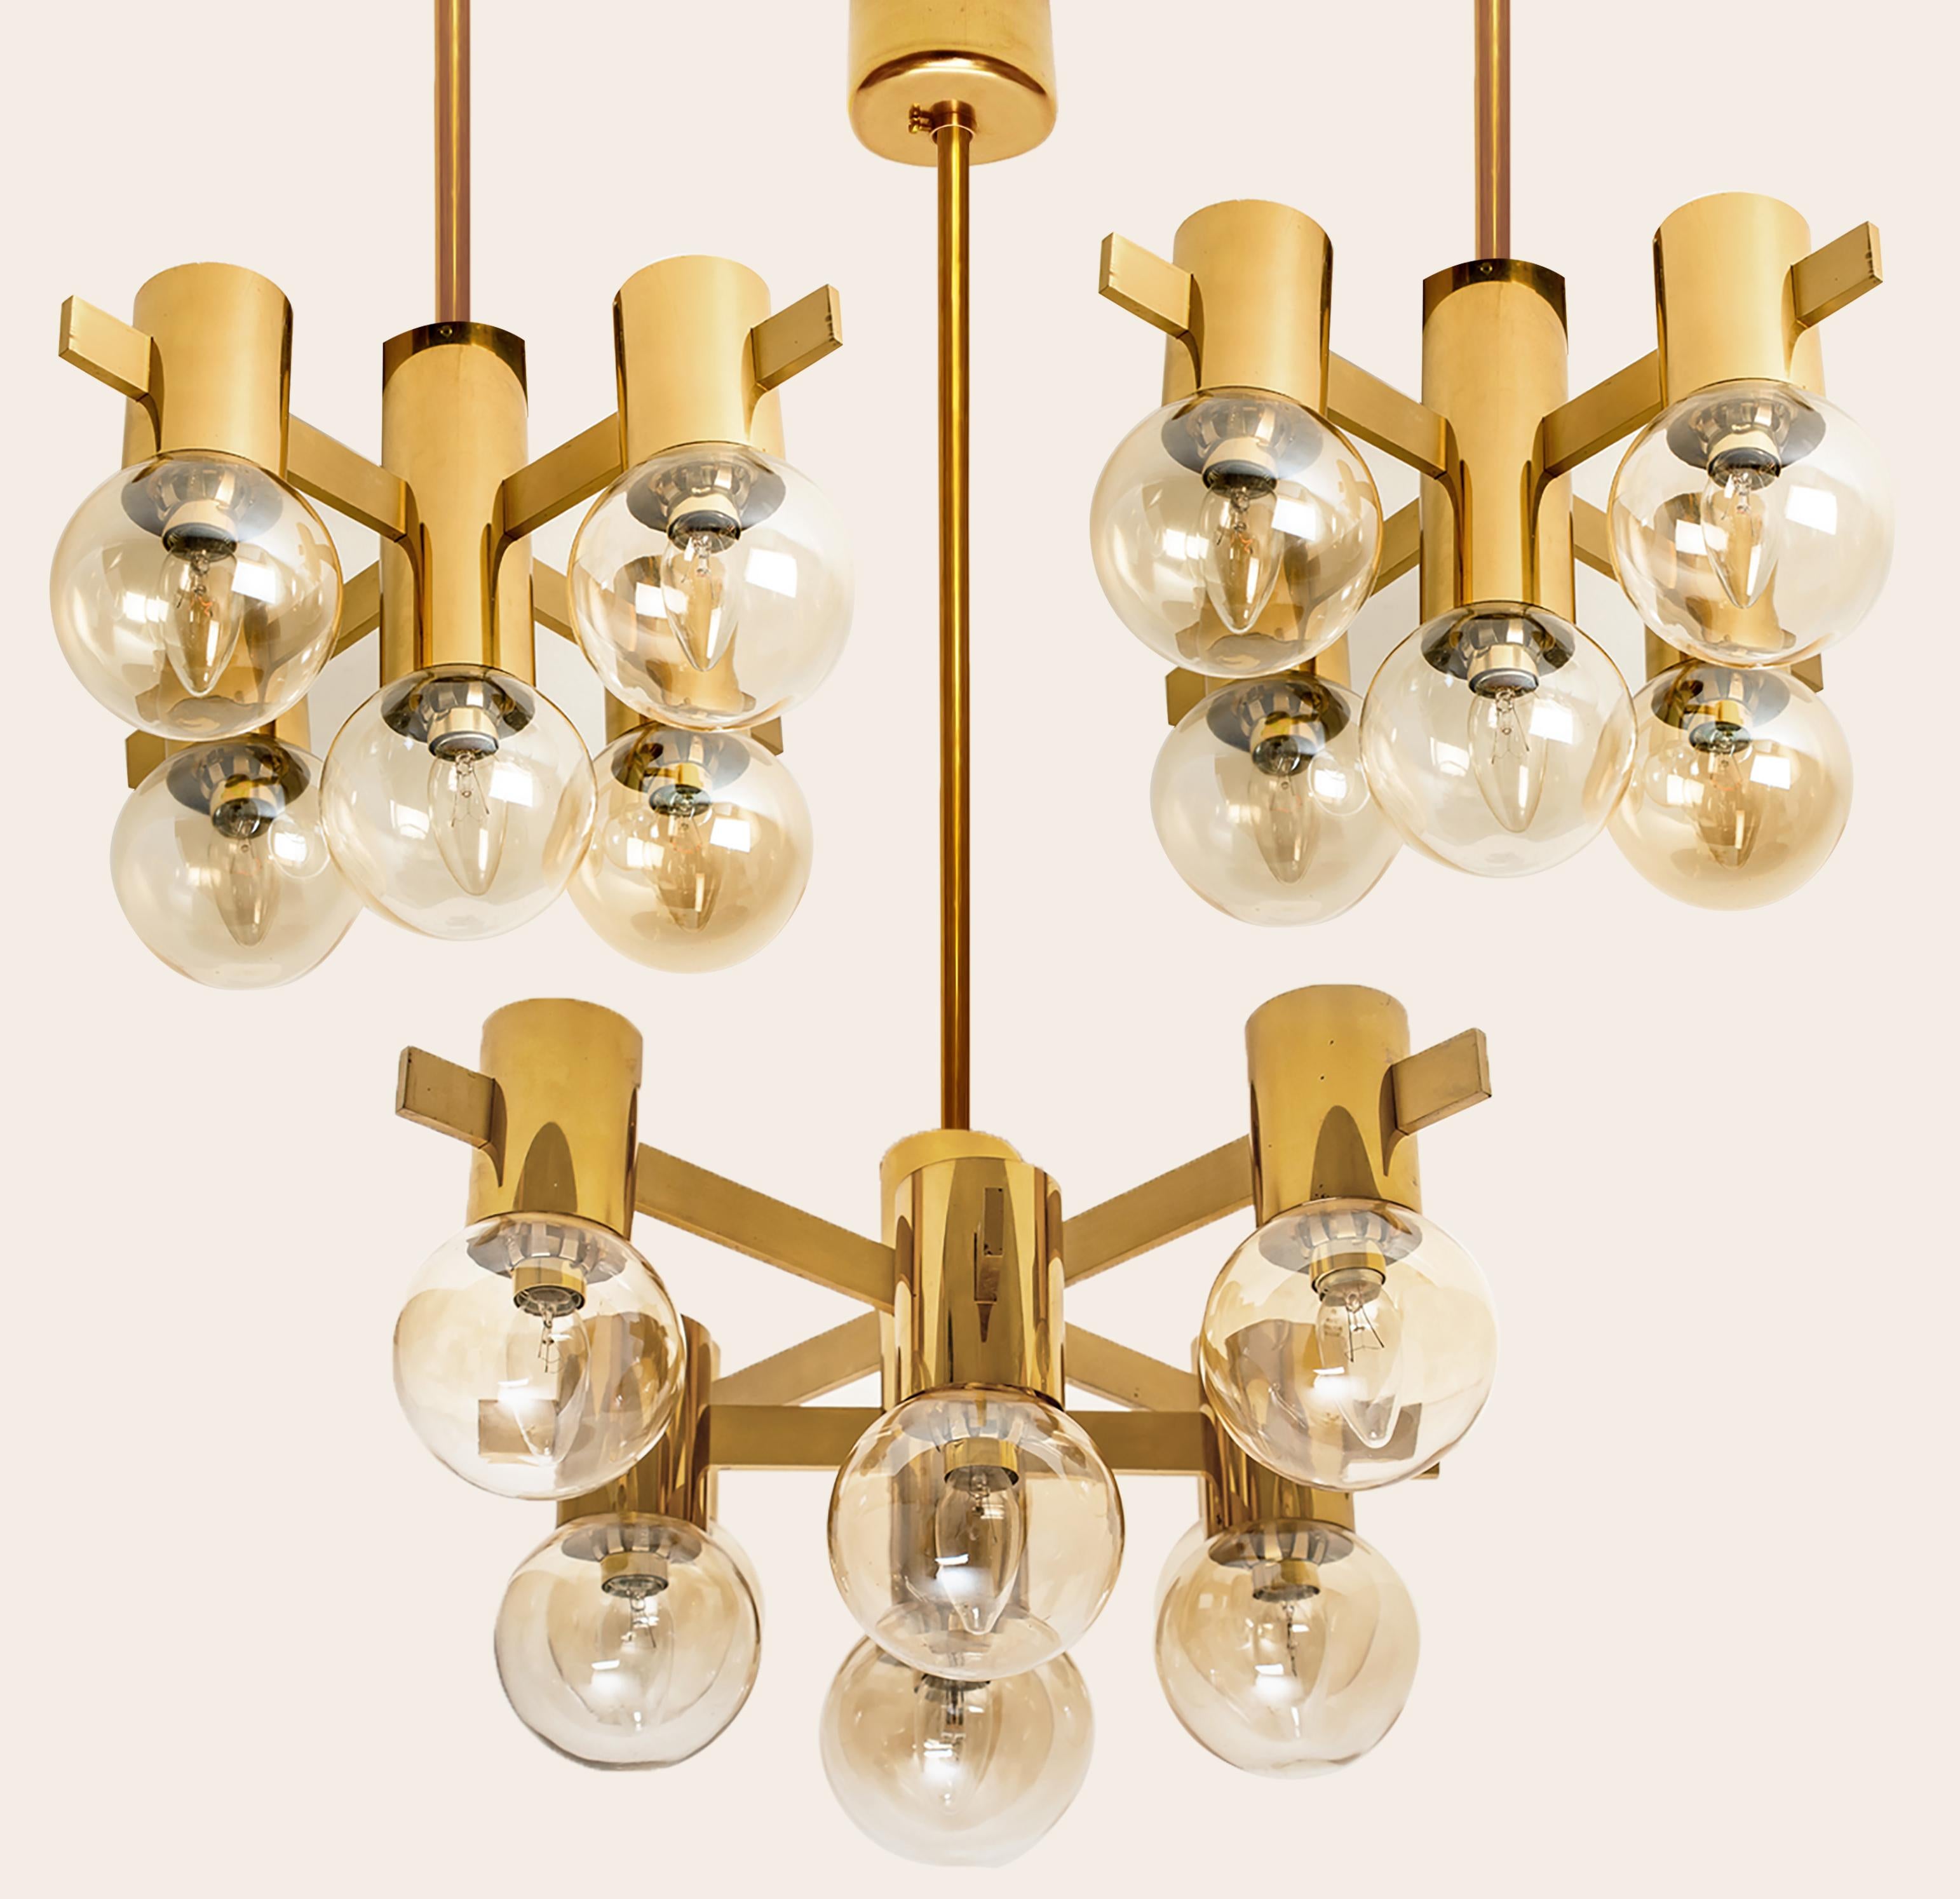 Pair of Brass and Glass Light Fixtures in the Style of Jakobsson, 1960s For Sale 1